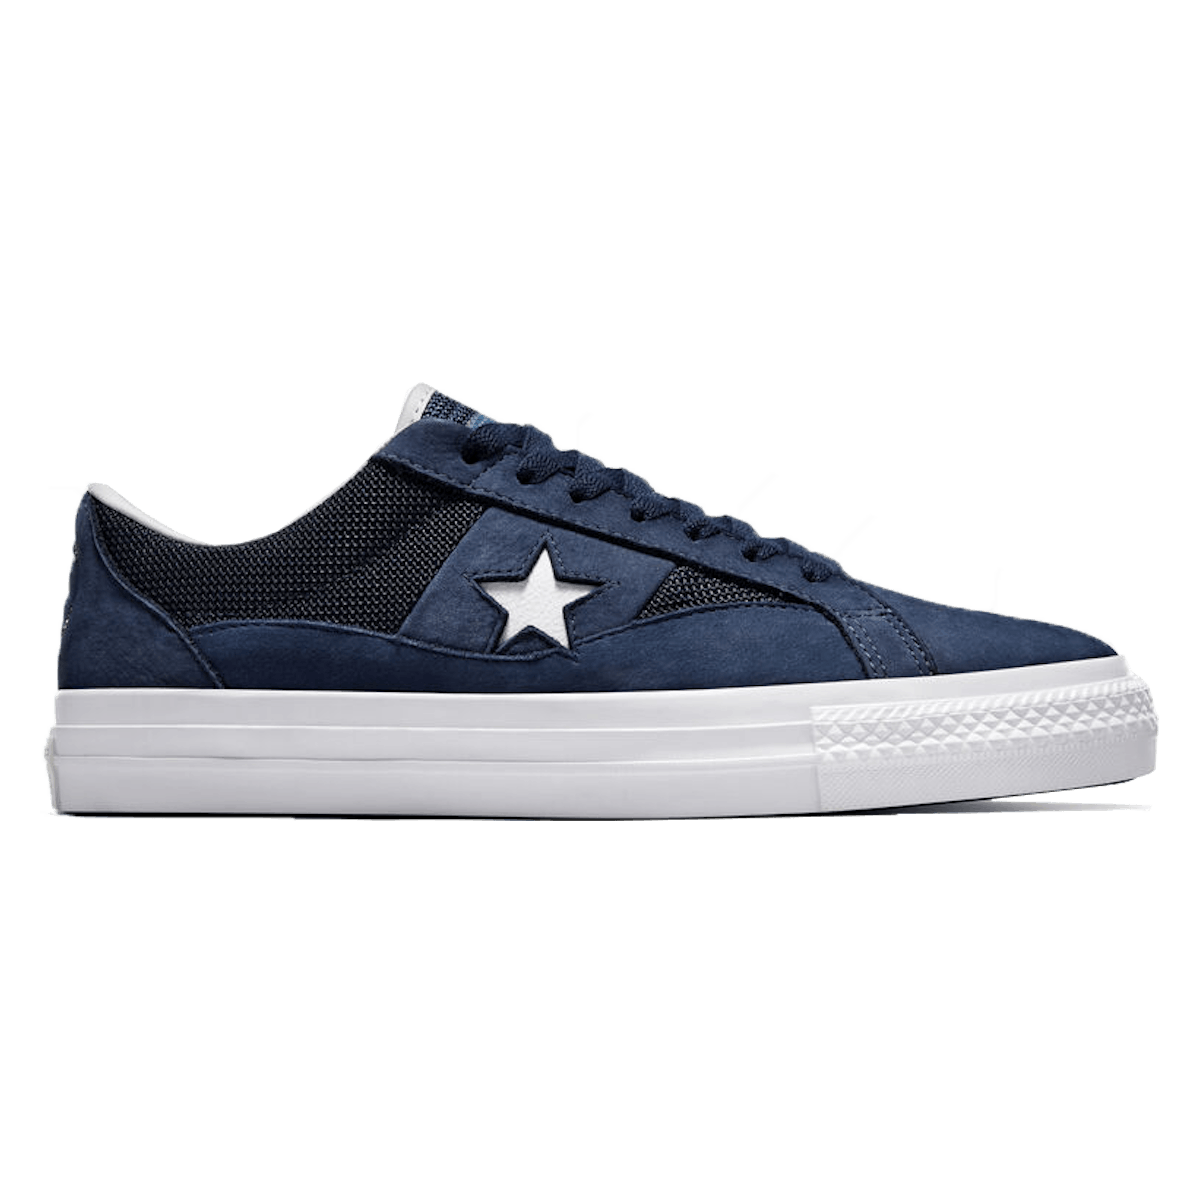 Alltimers x Converse CONS One Star Pro